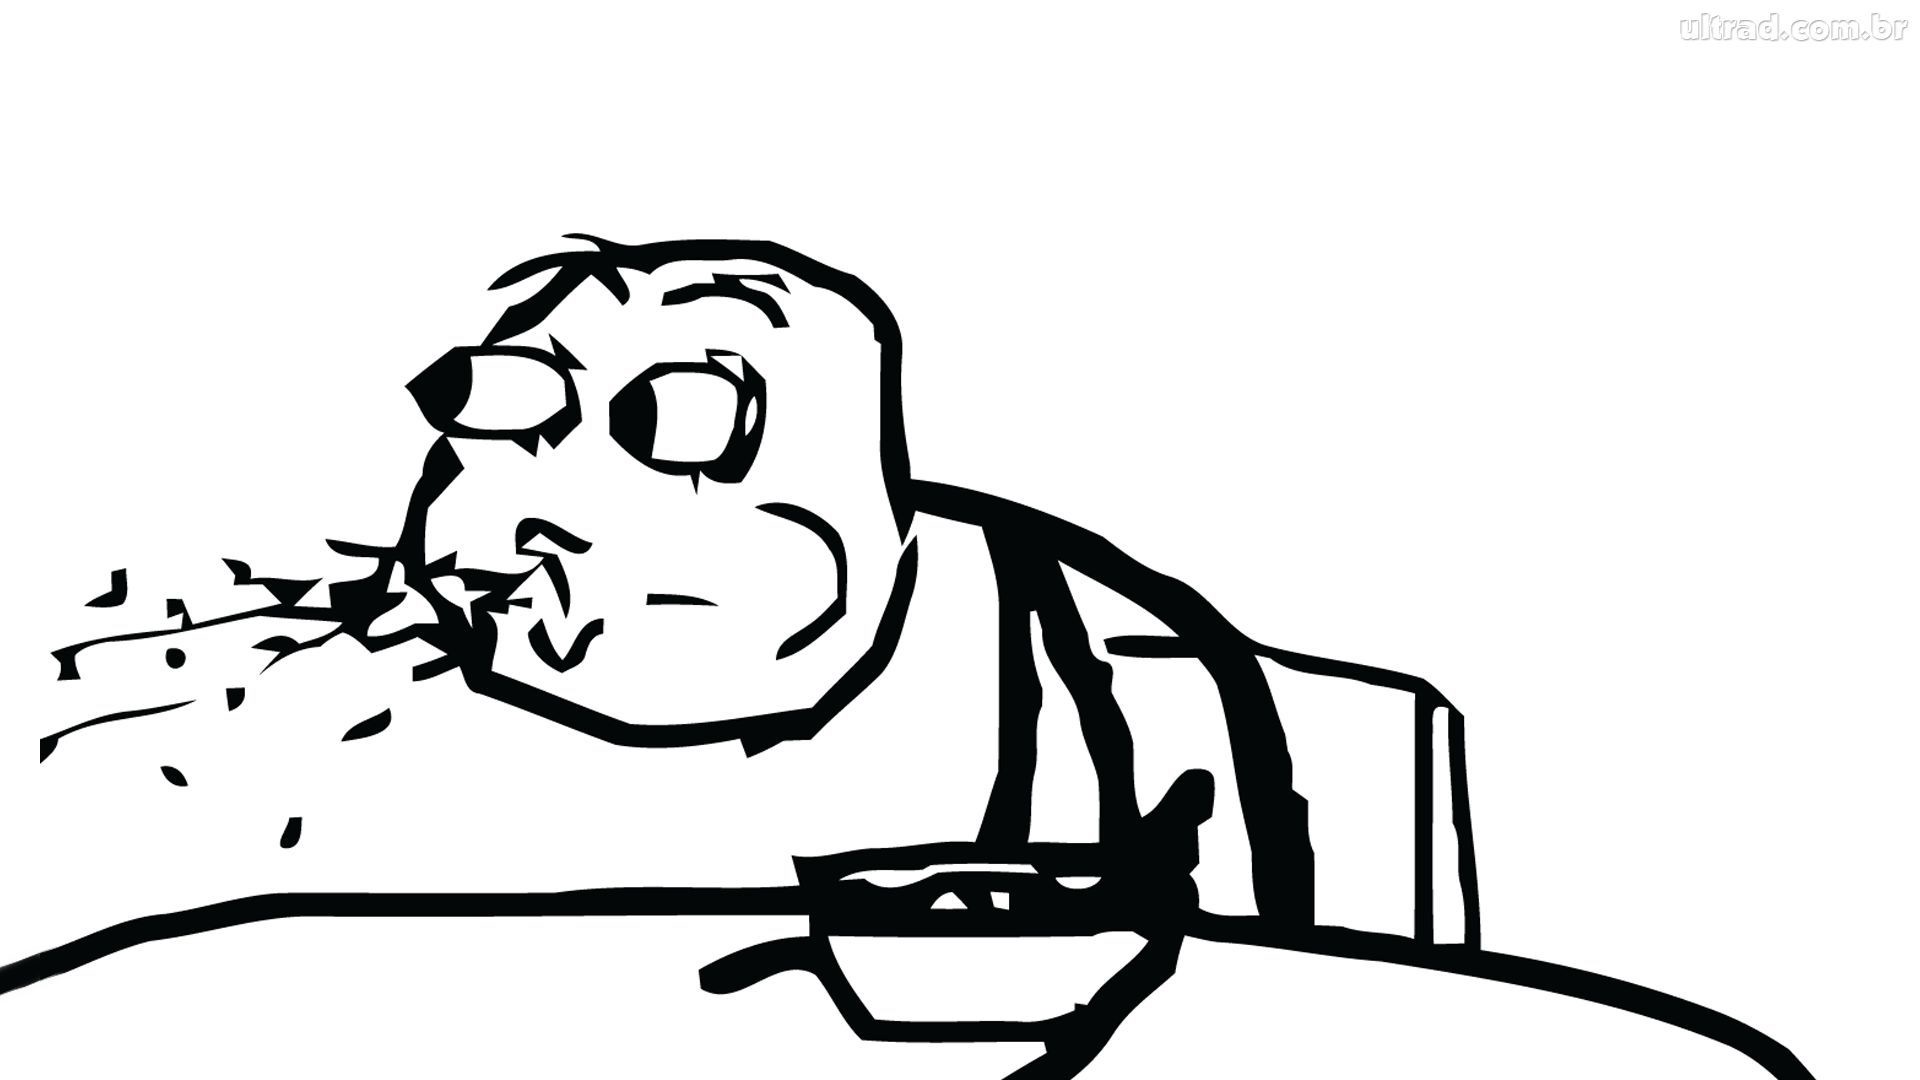 Cereal Guy, sitting with a bowl of cereal on a table and spitting out cereal in shock, is a stick-figure character commonly used on image boards and discussion forums as a multi-purpose reaction face